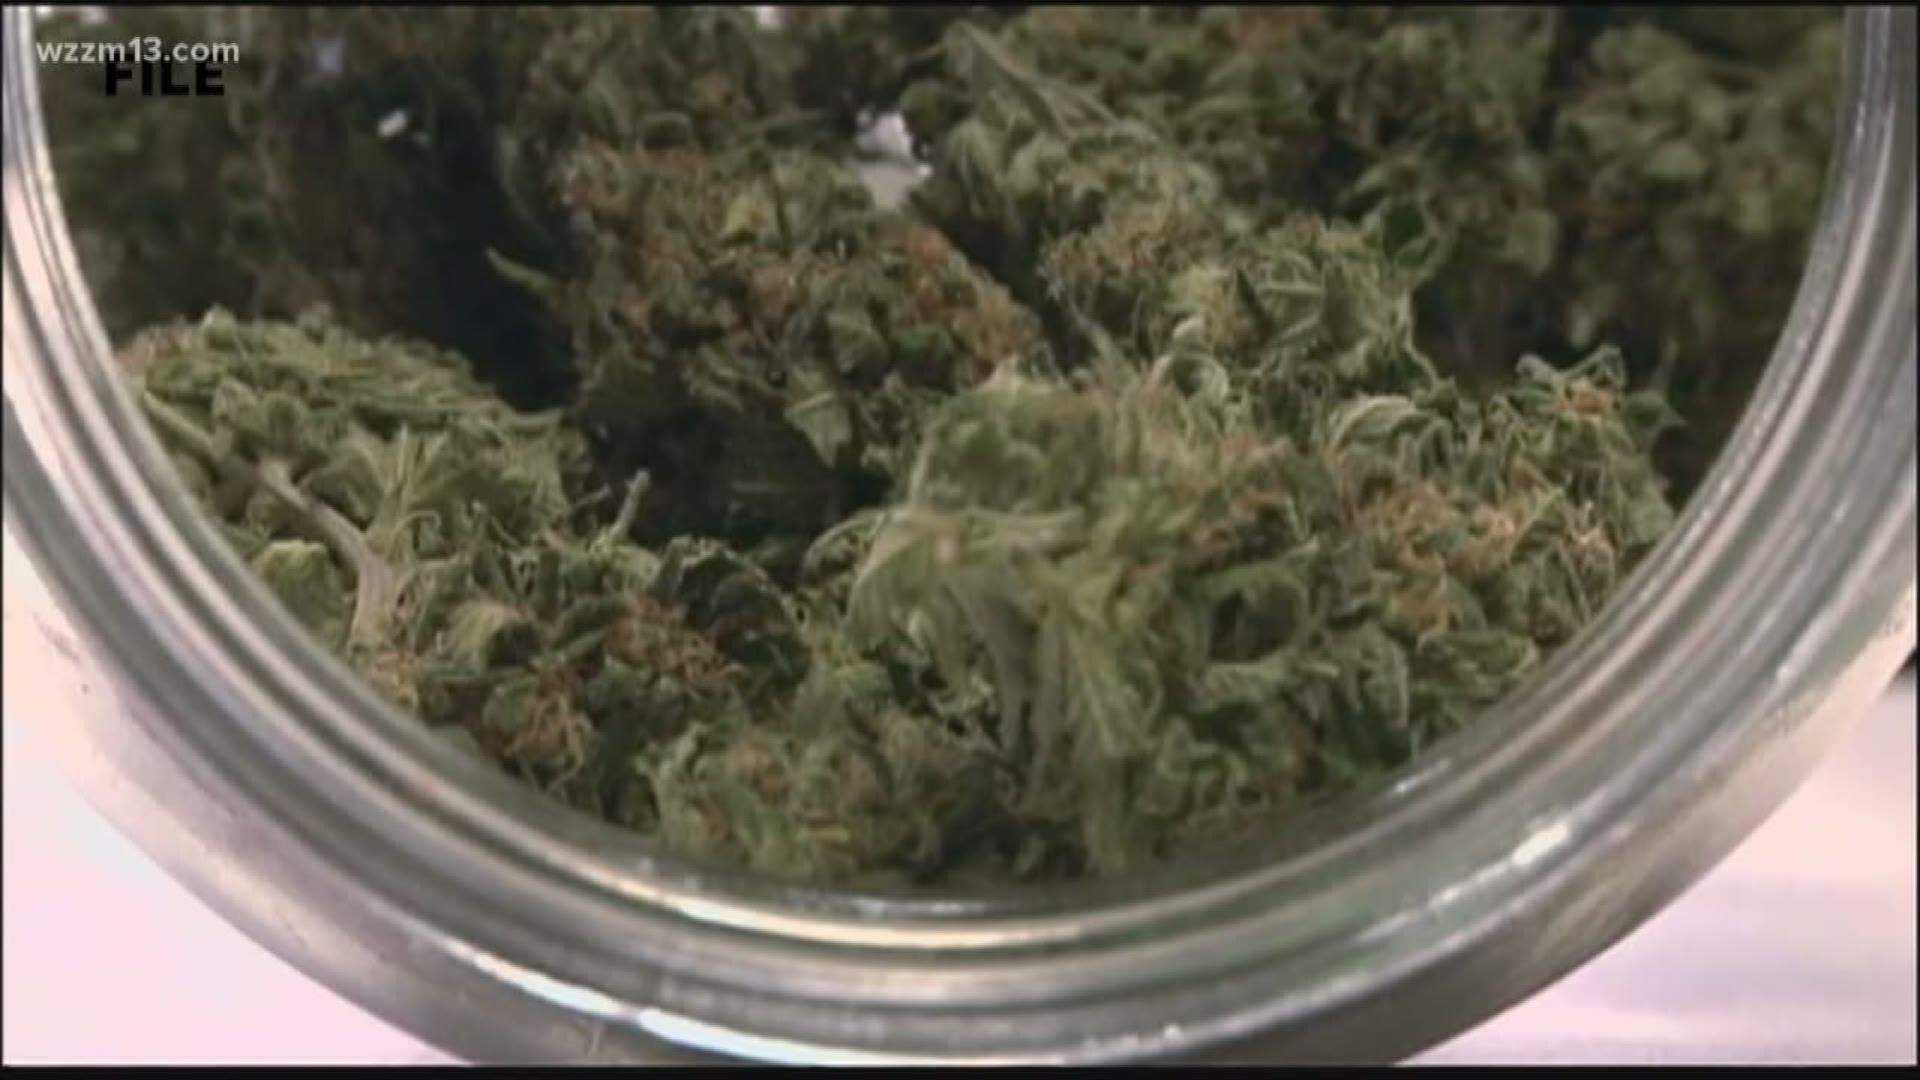 Recreational marijuana expected to be legalized in December